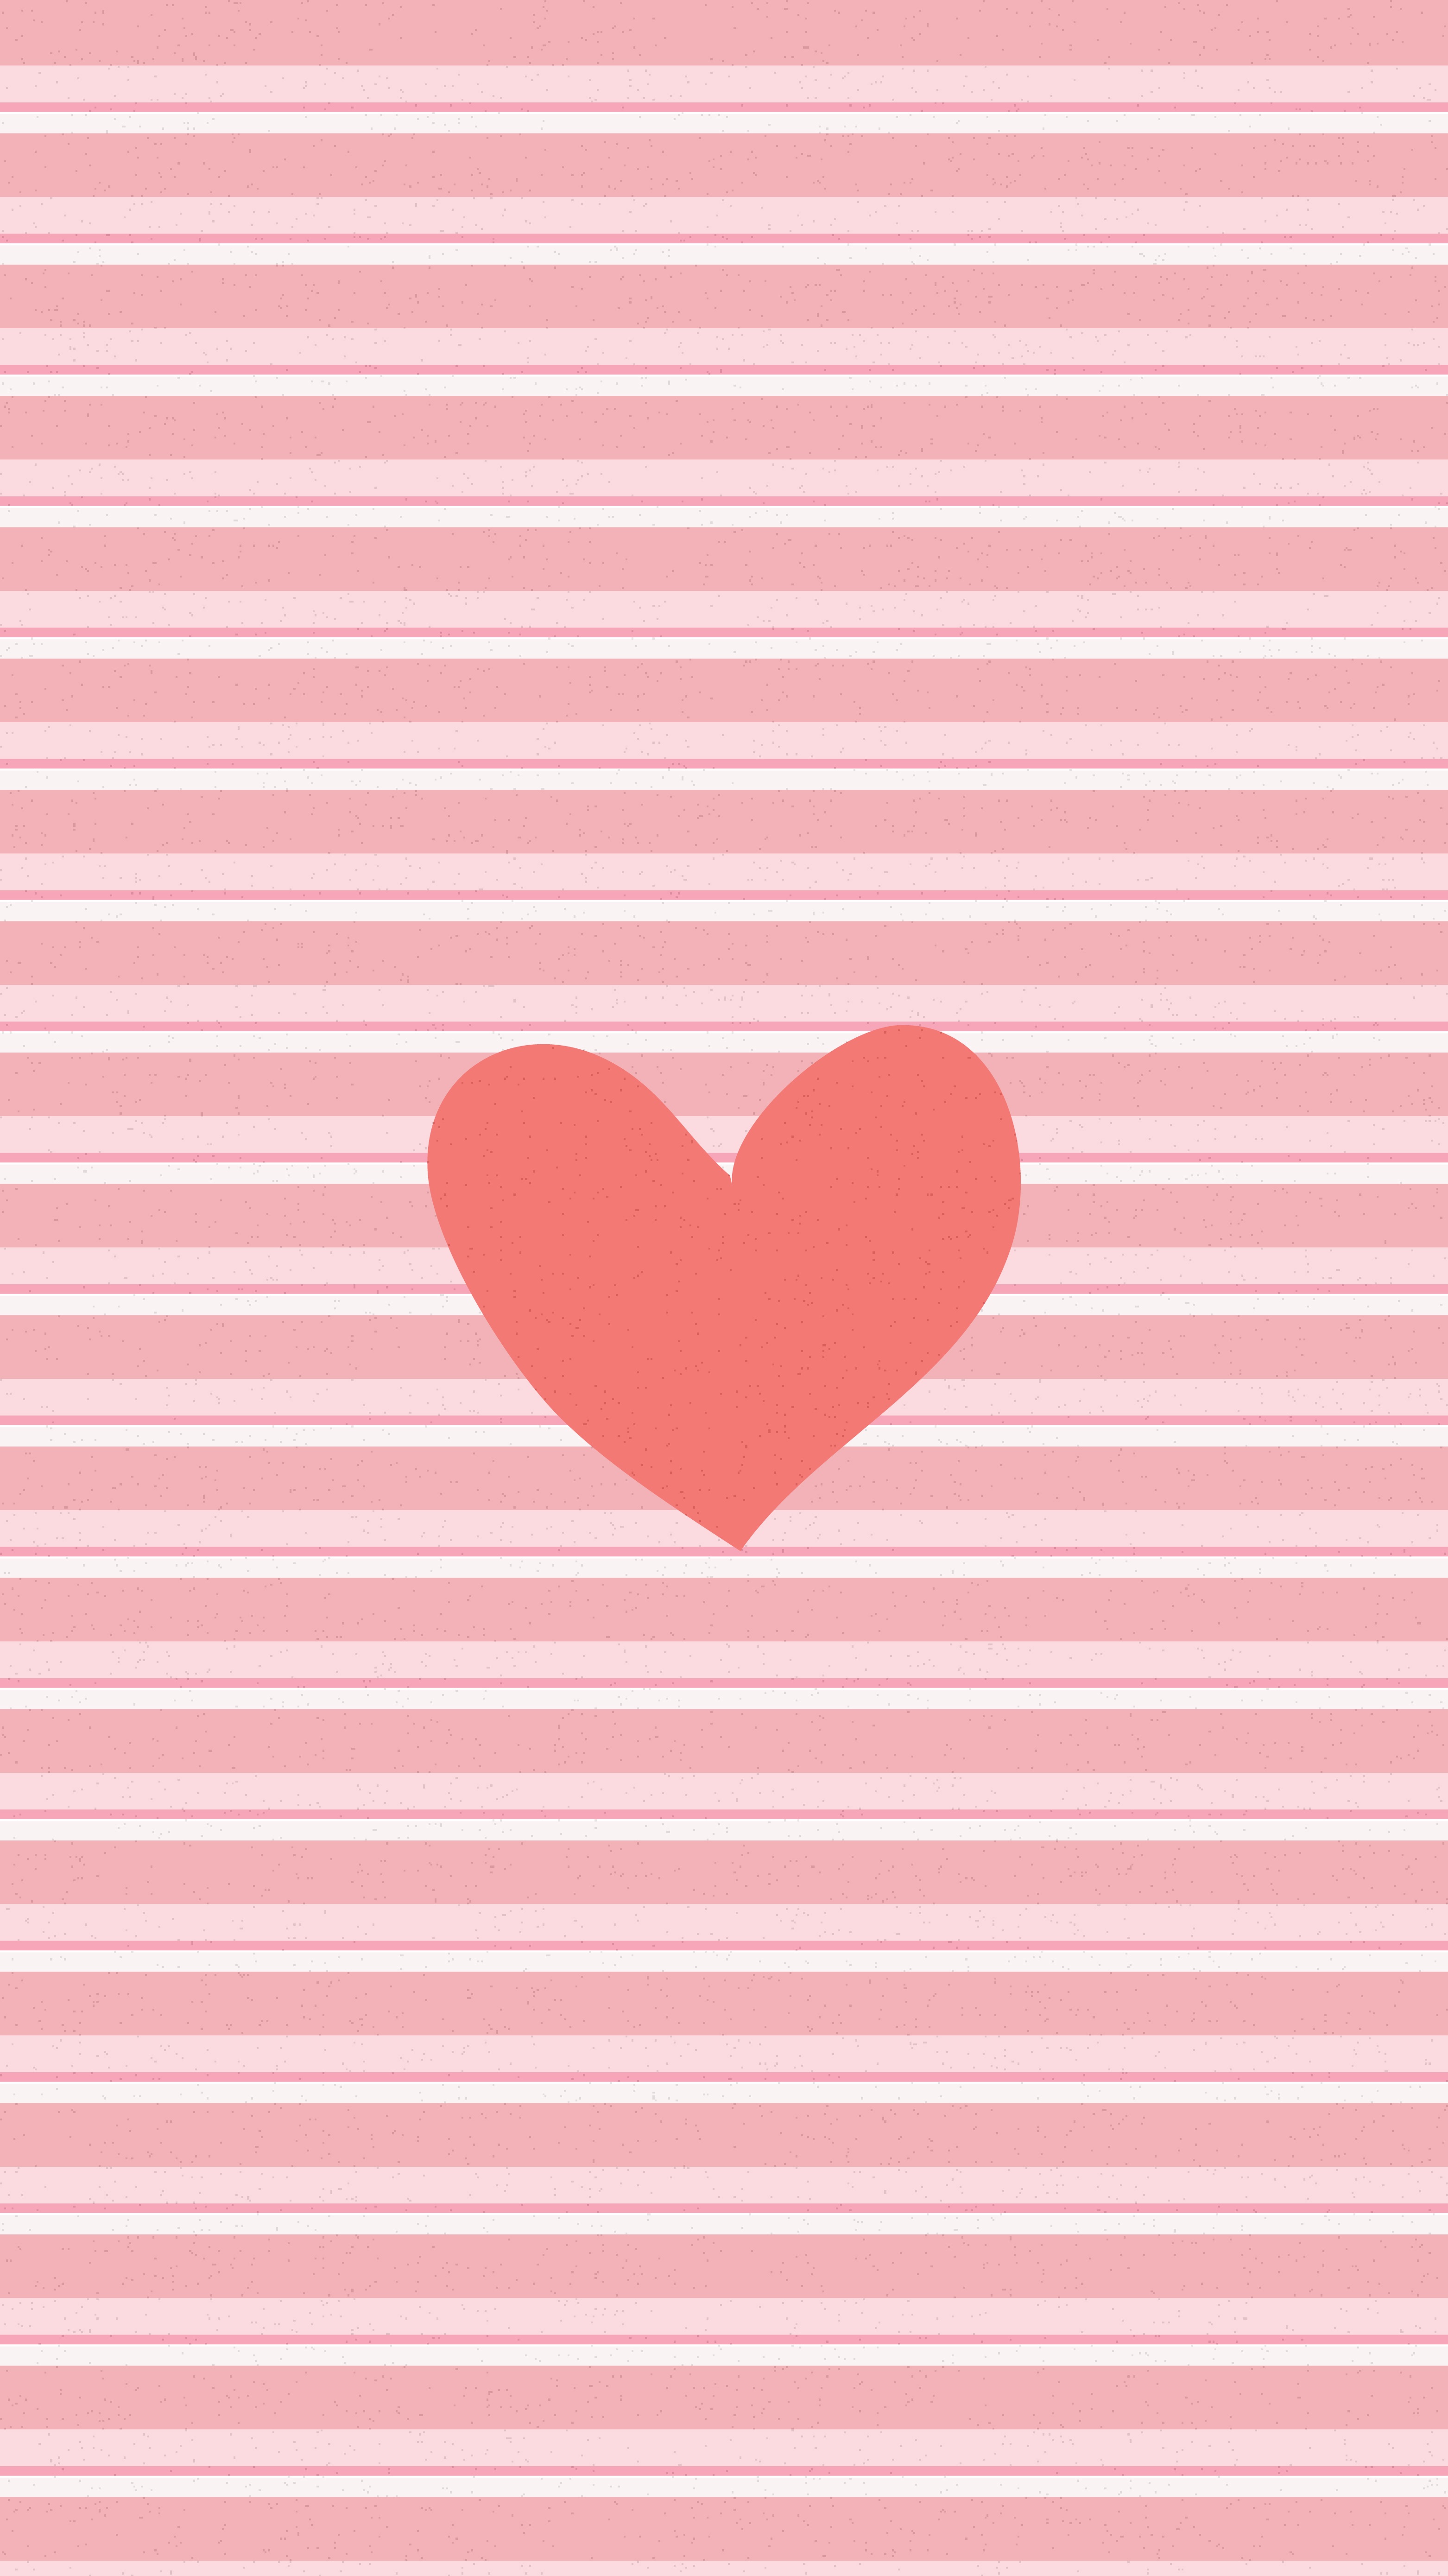 28 Valentines Aesthetic ideas  valentines wallpaper cute wallpapers iphone  wallpaper